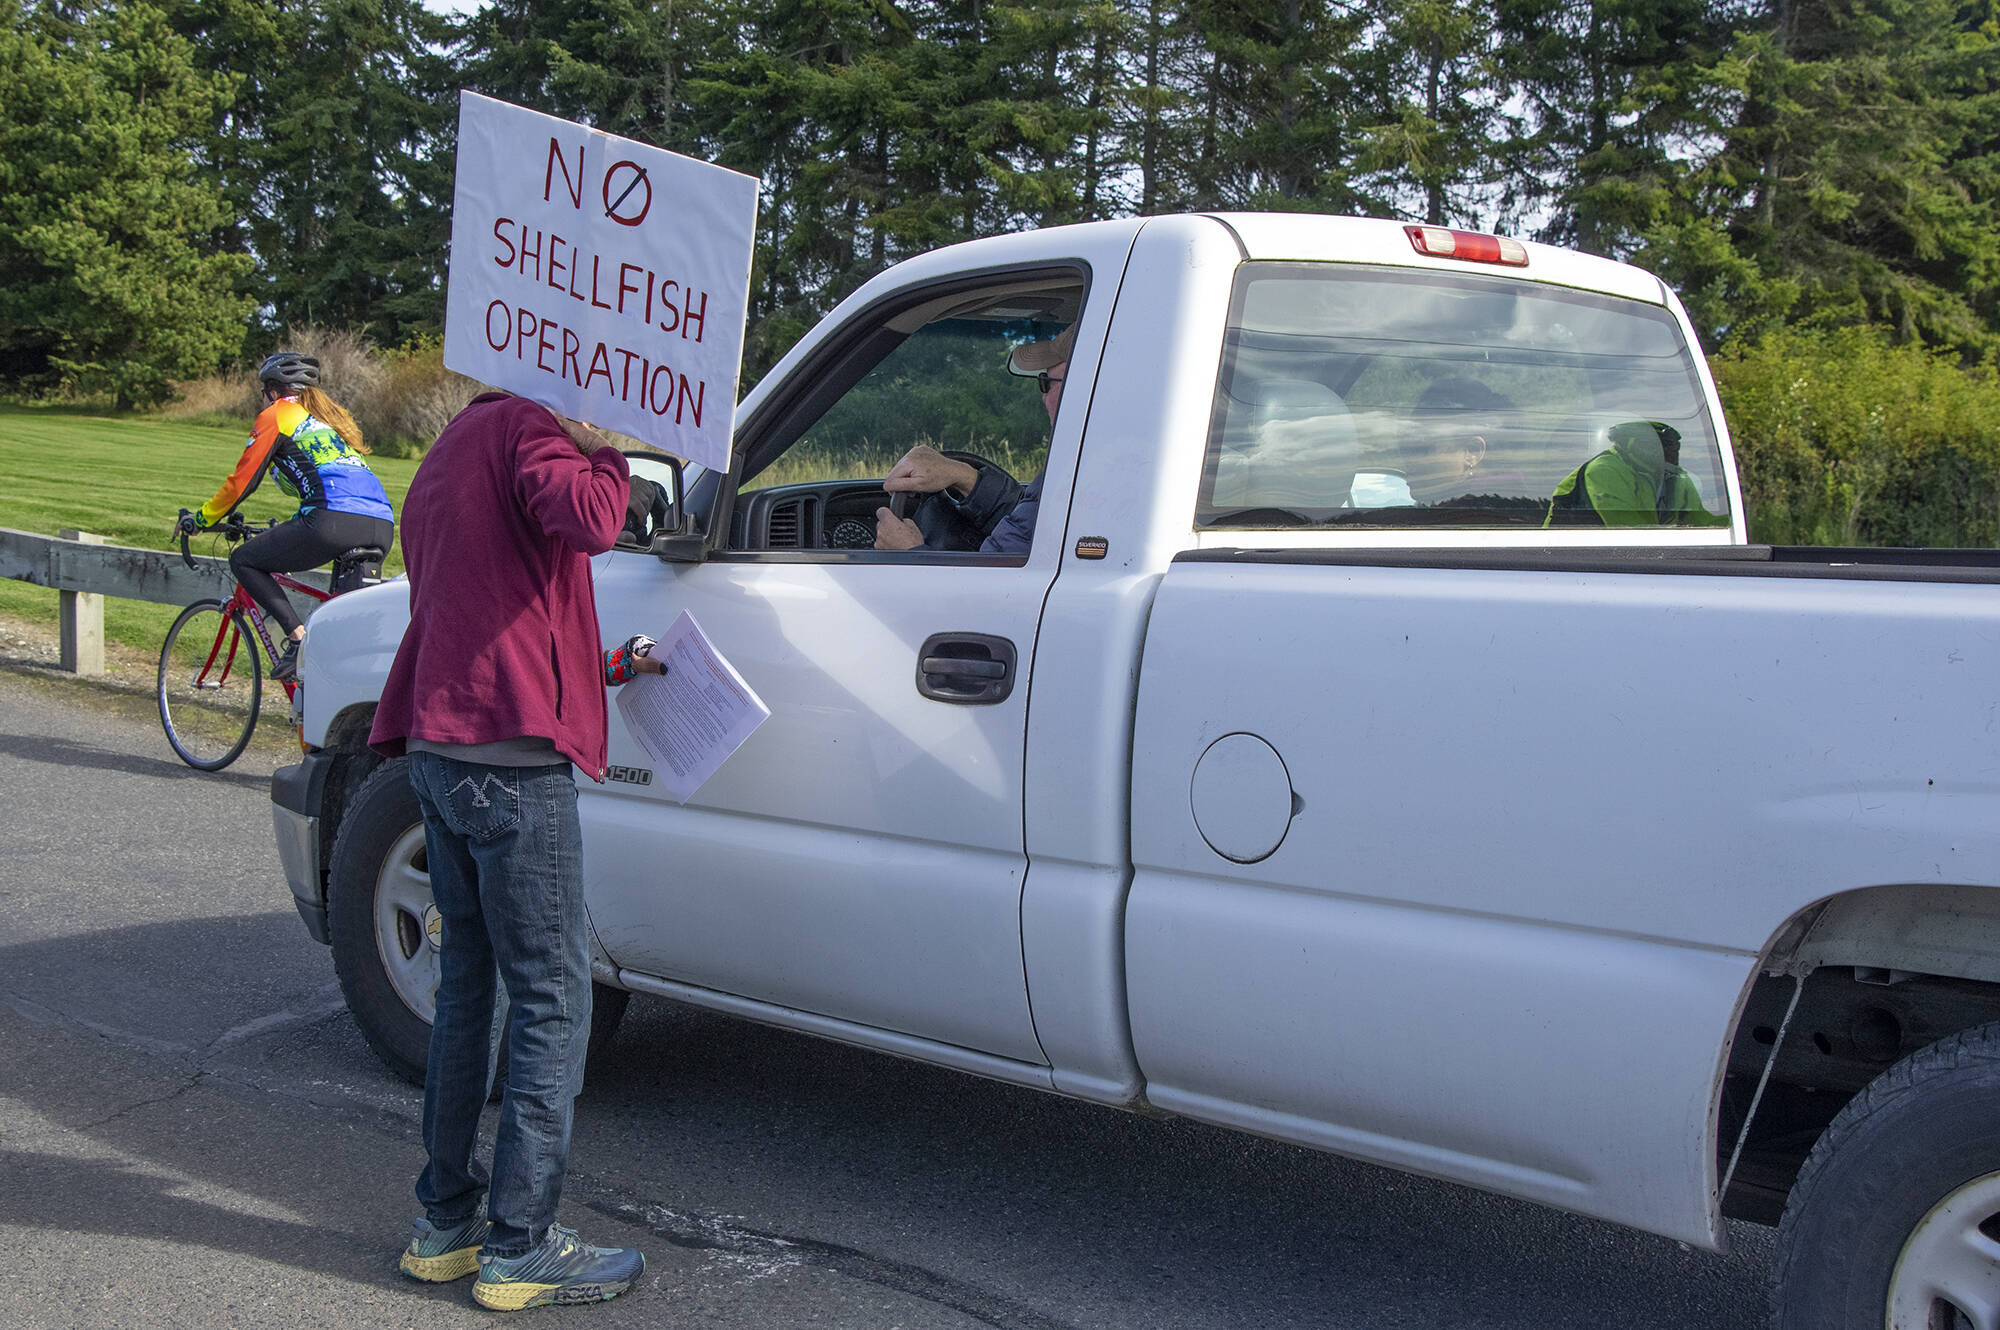 Jane Erickson speaks with a drive entering the Dungeness National Wildlife Refuge on Oct. 2, 2021, during a protest against a future oyster farm at the refuge in Sequim. Sequim Gazette photo by Emily Matthiessen